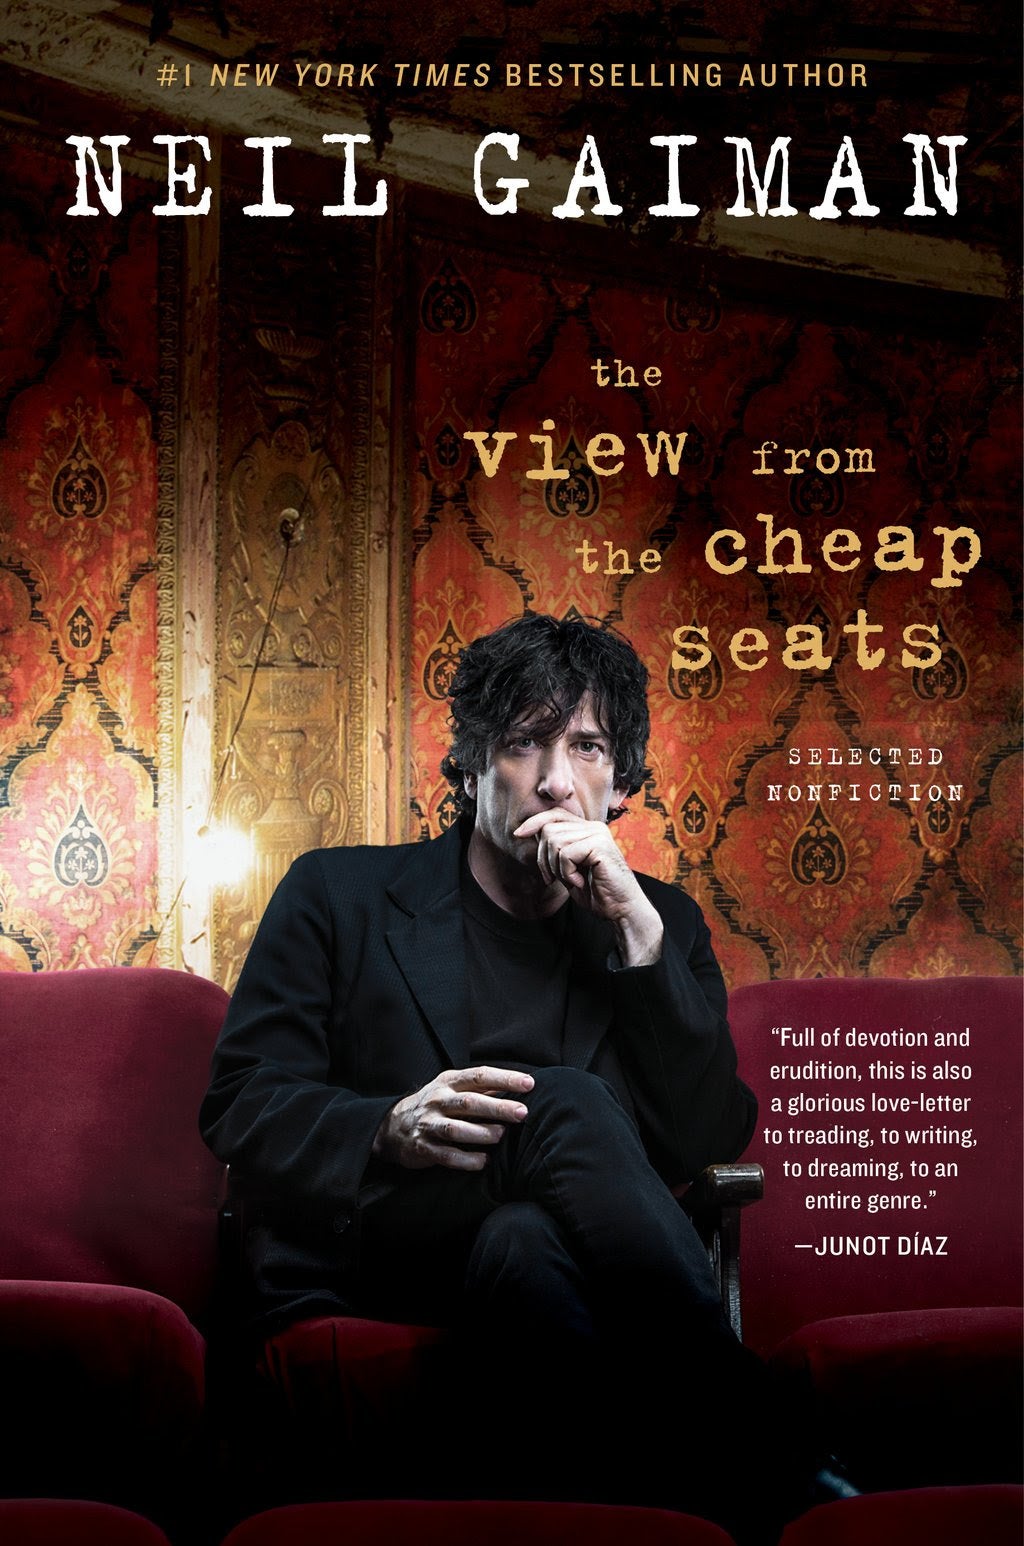 Gaiman proves a dab hand at non-fiction with a huge collection of his thoughts on the things that inspire, interest and inflame him